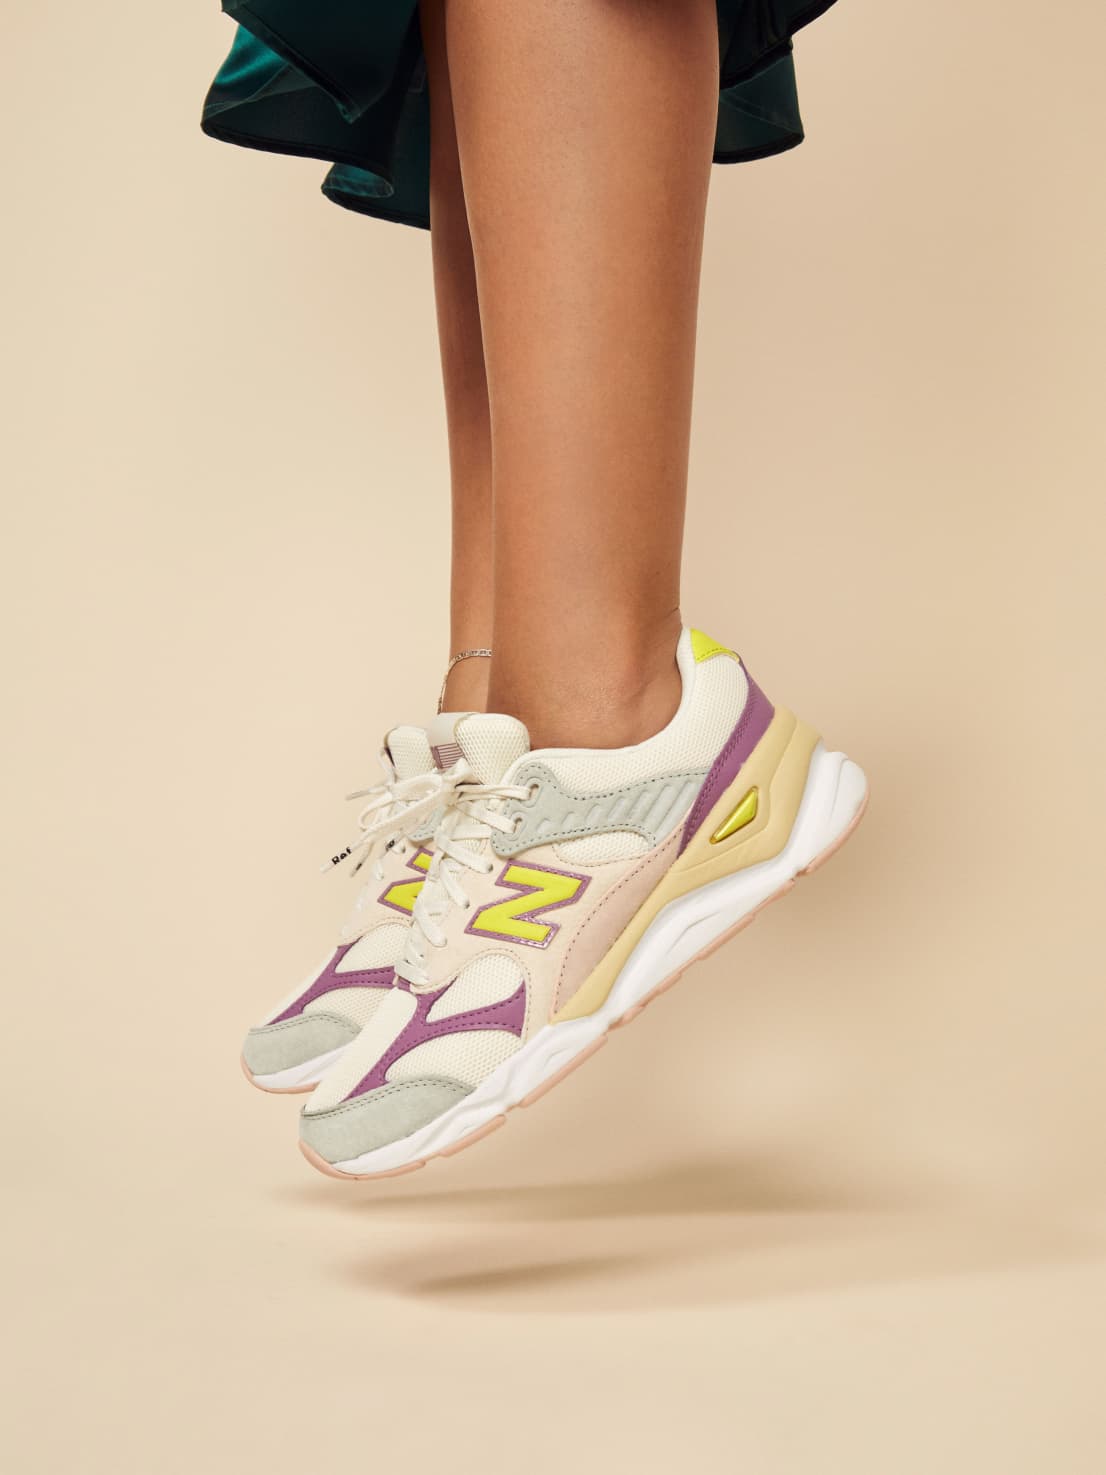 reformation new balance x90 sneaker in white green